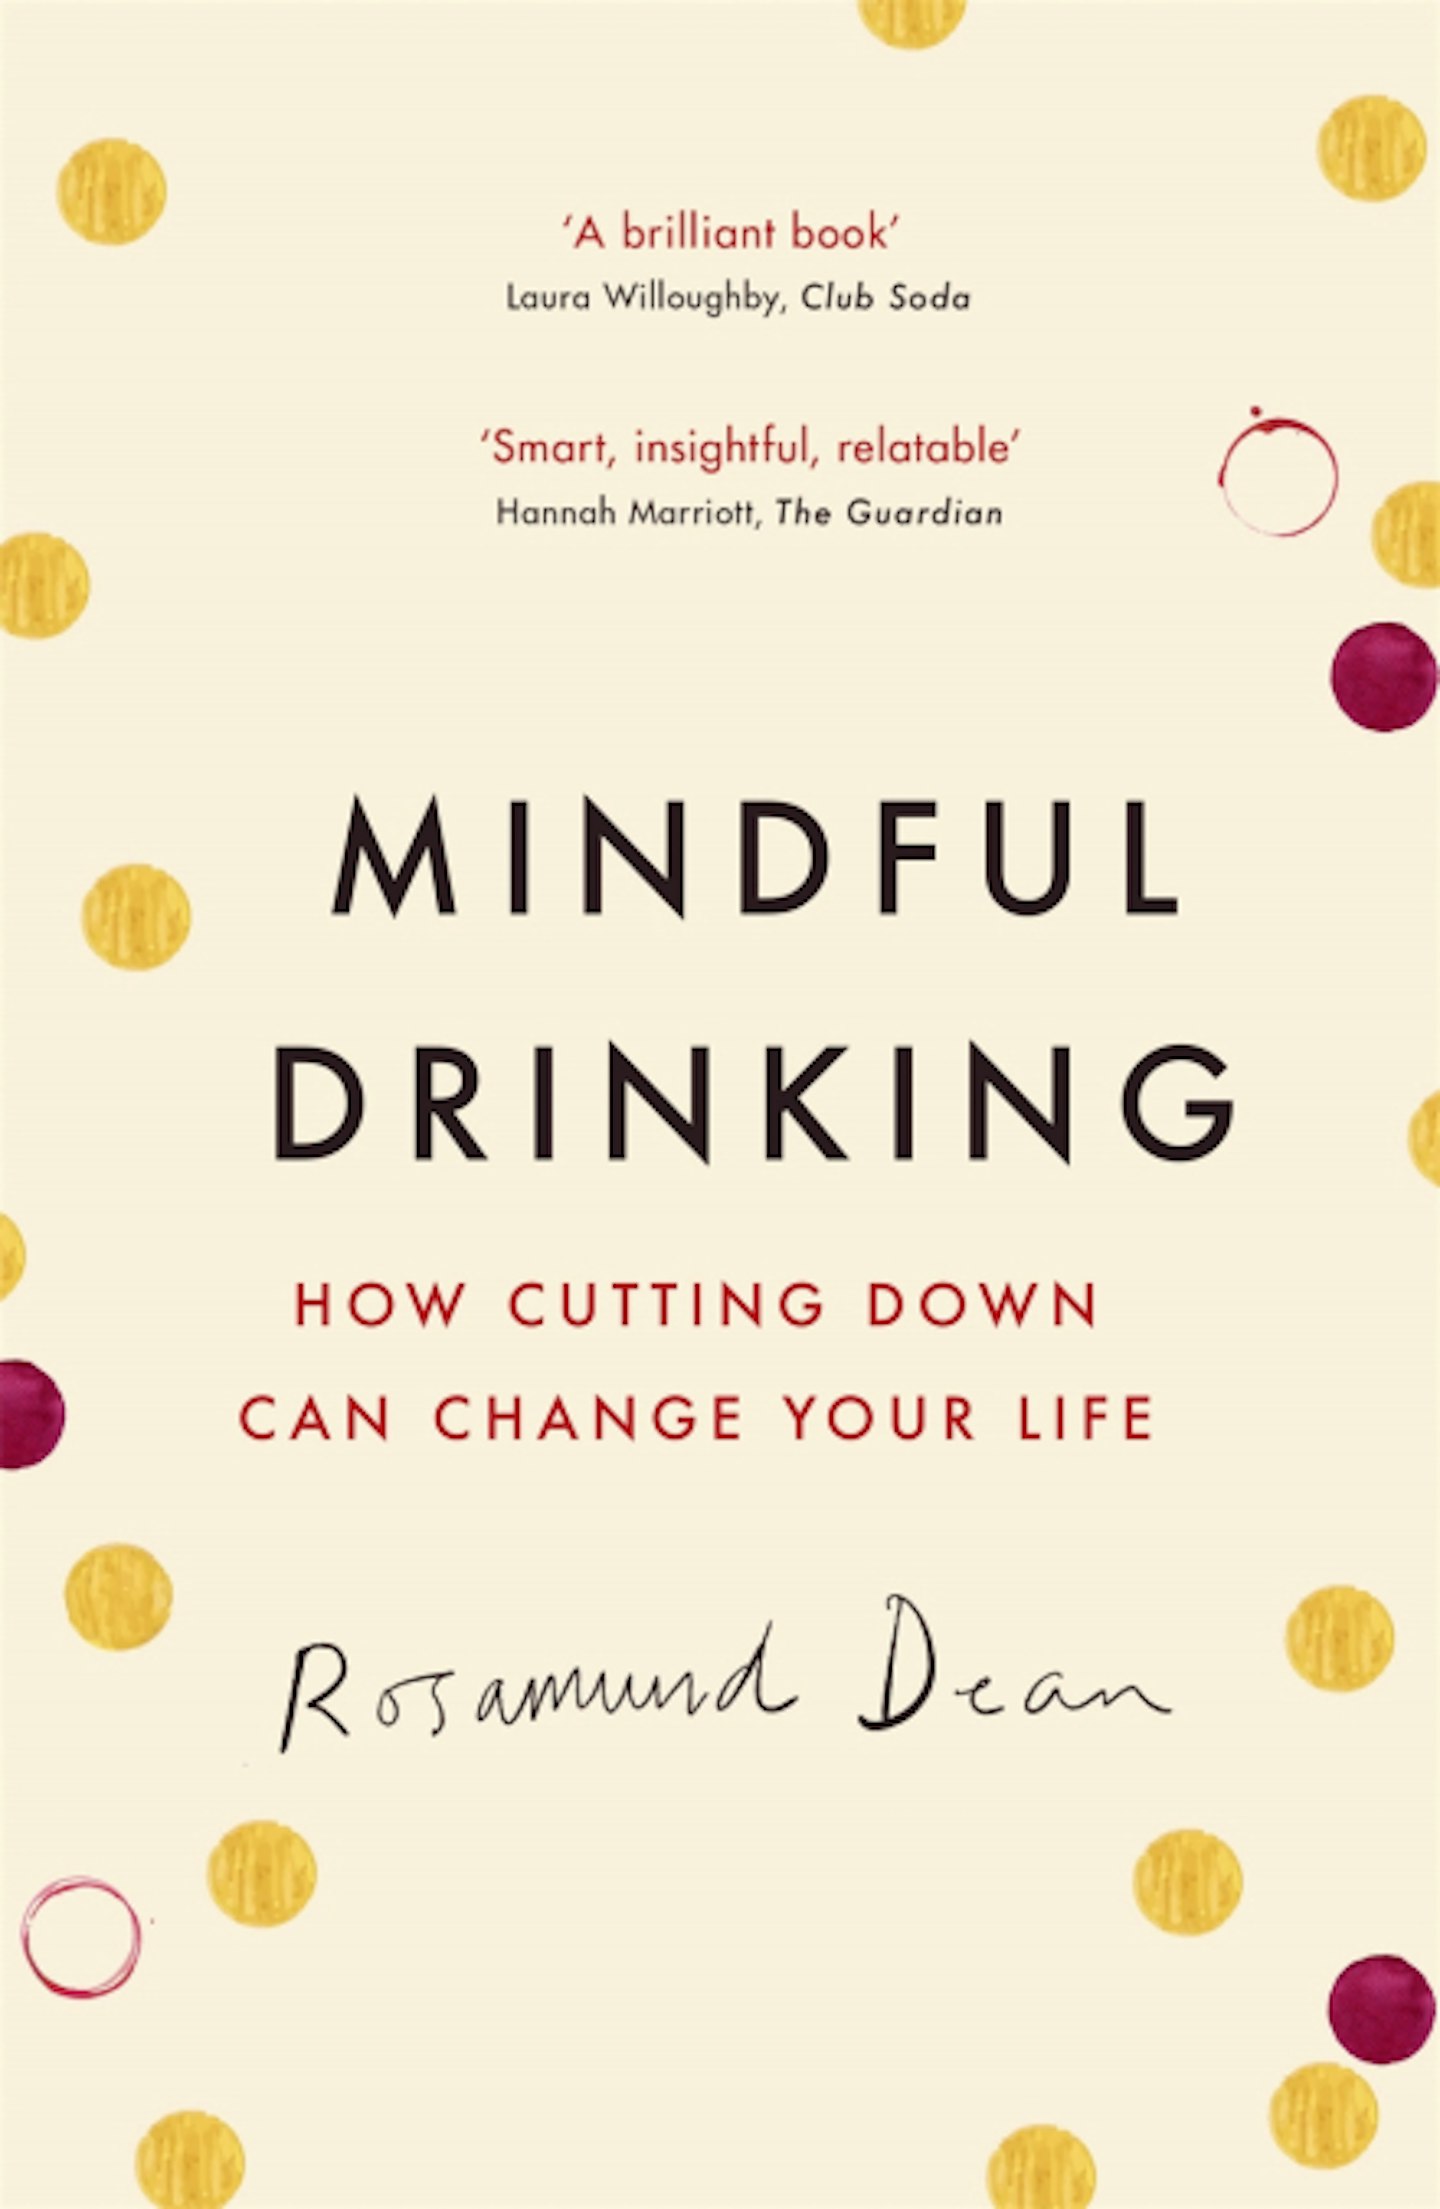 best self help books Mindful Drinking: How Cutting Down Can Change Your Life, by Rosamund Dean